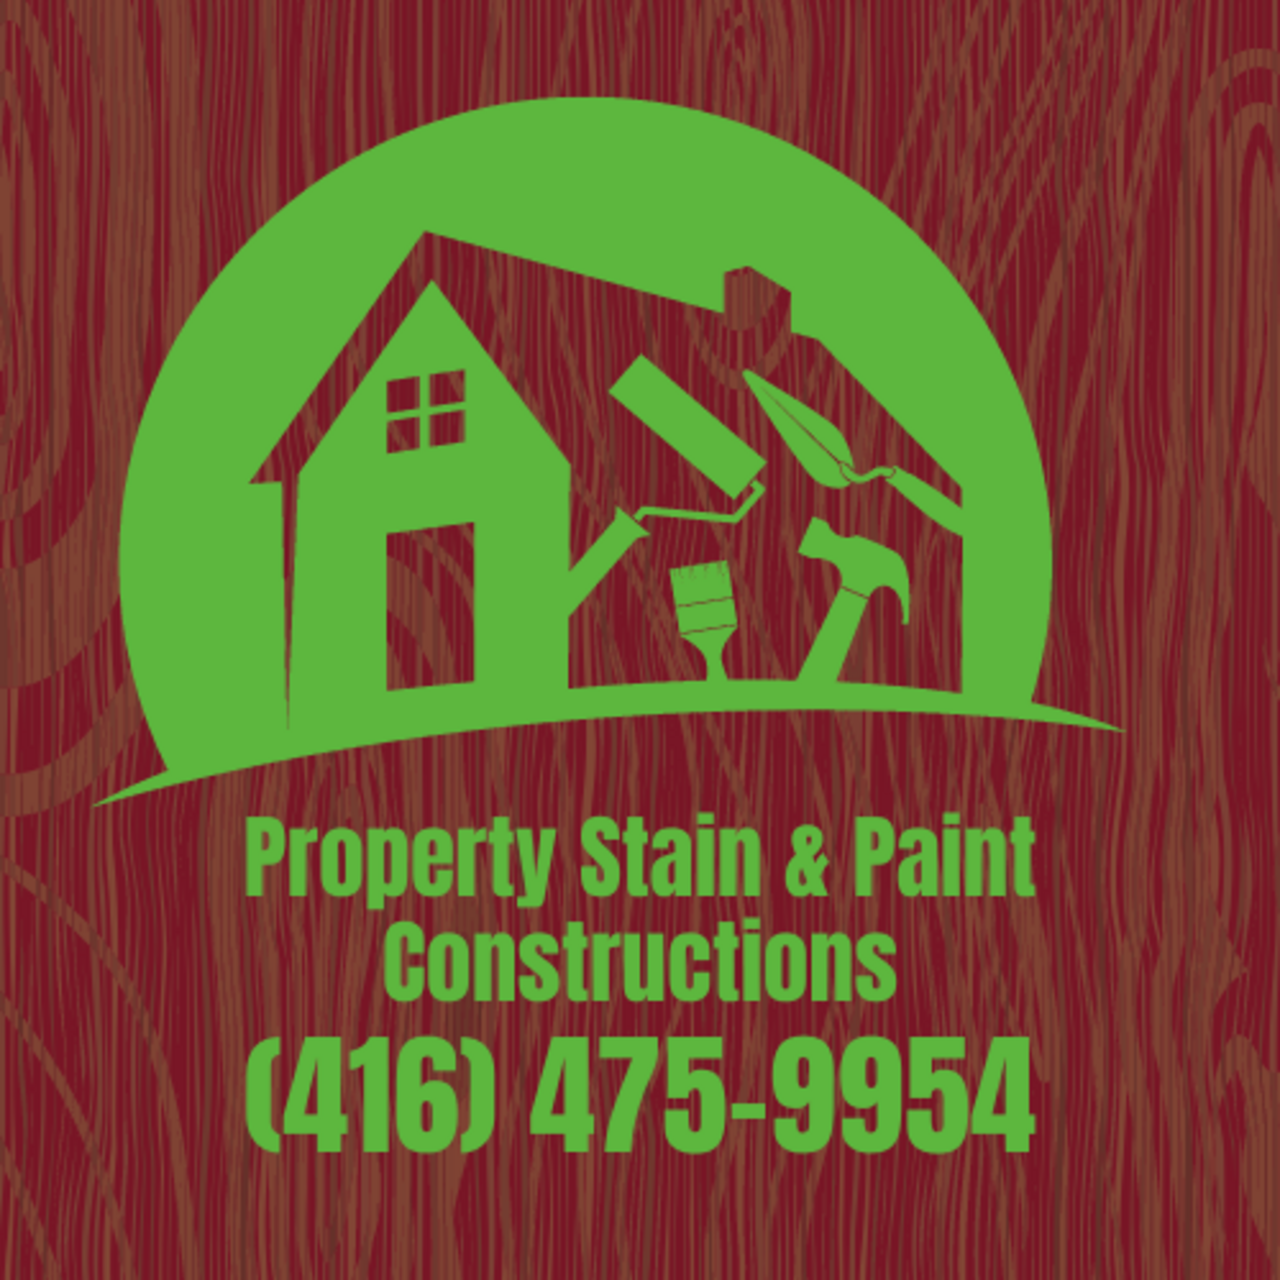 Property Stain & Paint Constructions's logo